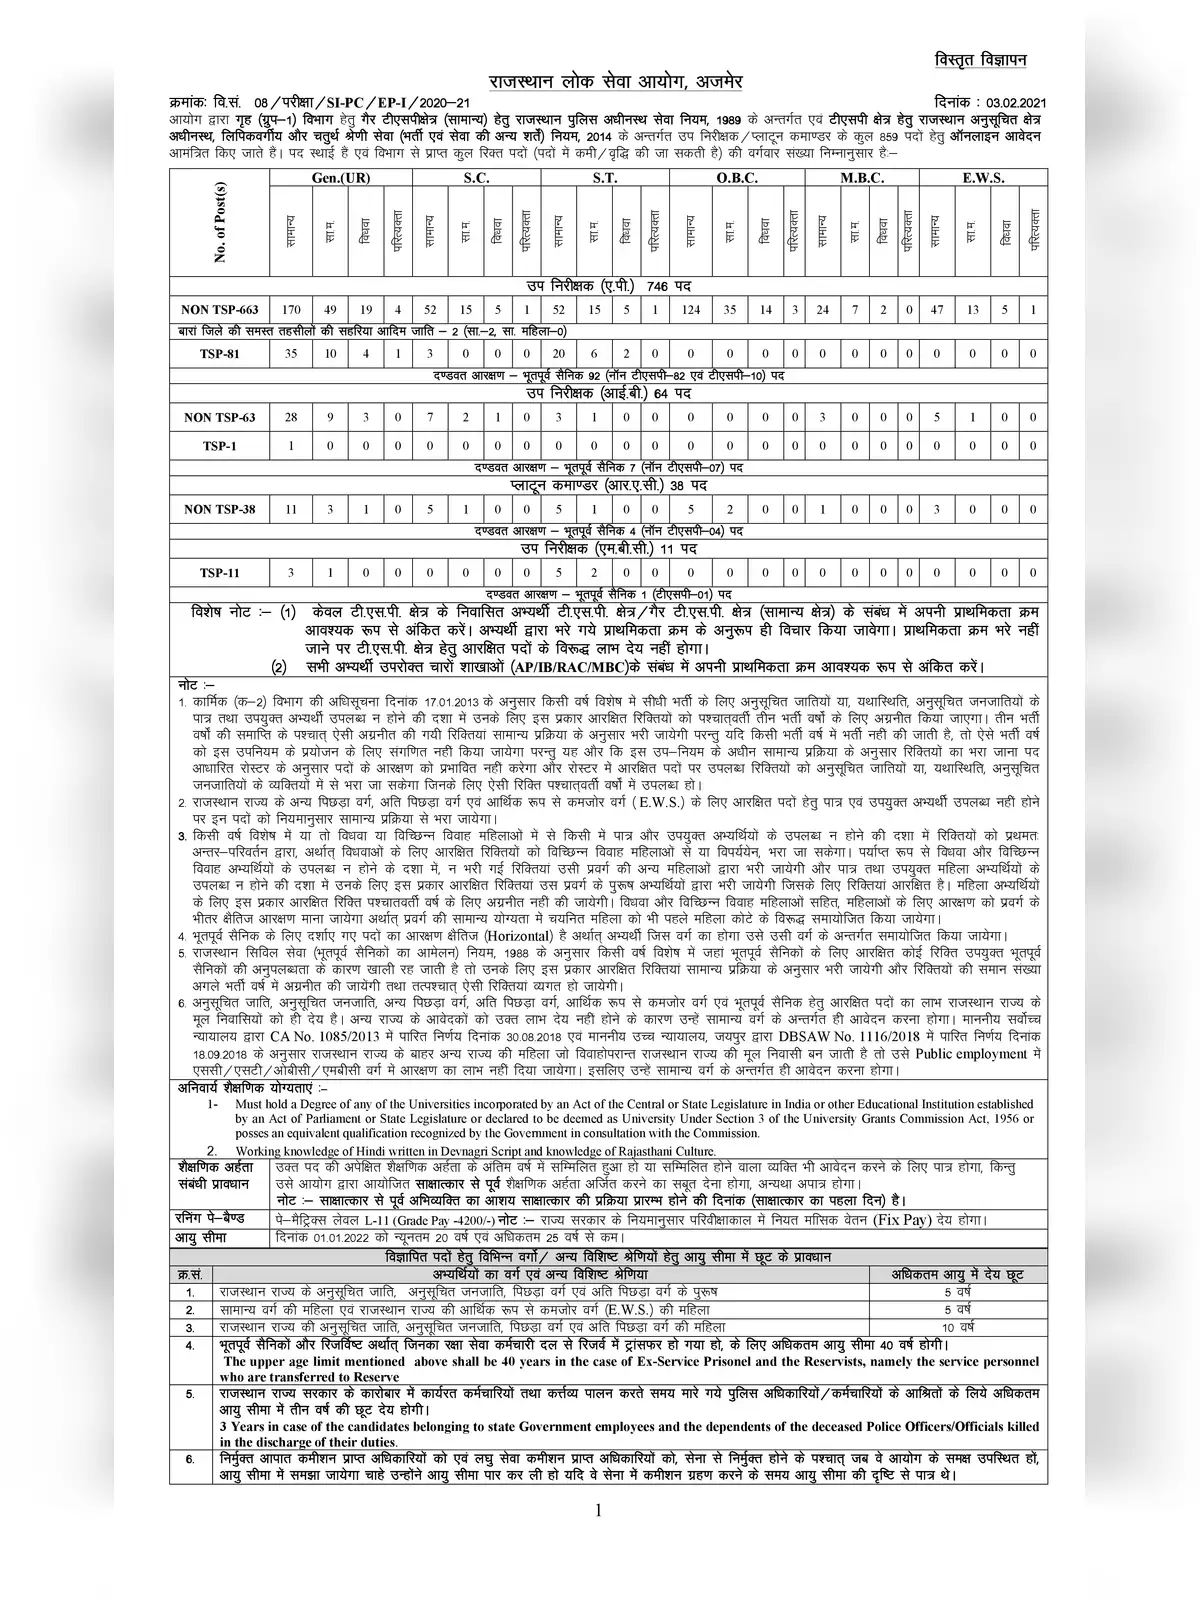 Rajasthan Police SI (RPSC) Recruitment 2021 Notification